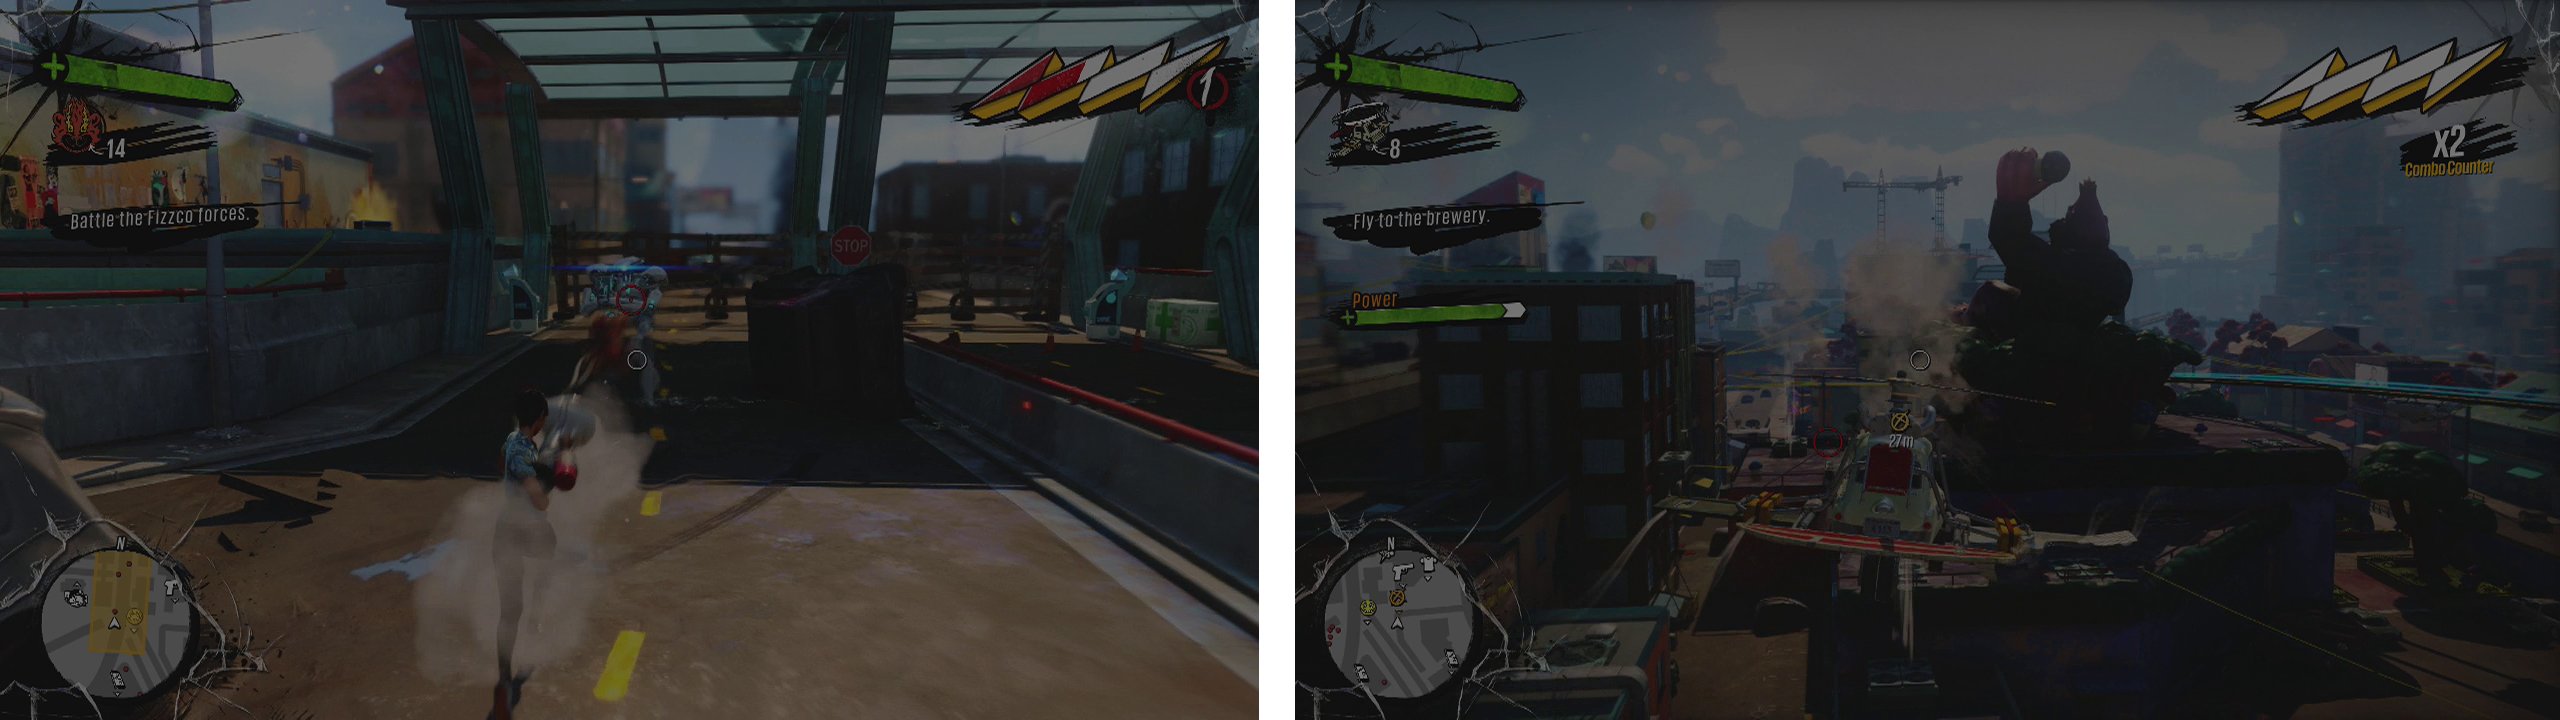 Defend the area against the Fizzco Bots (left) and then fly the Glider when able to do so (right).